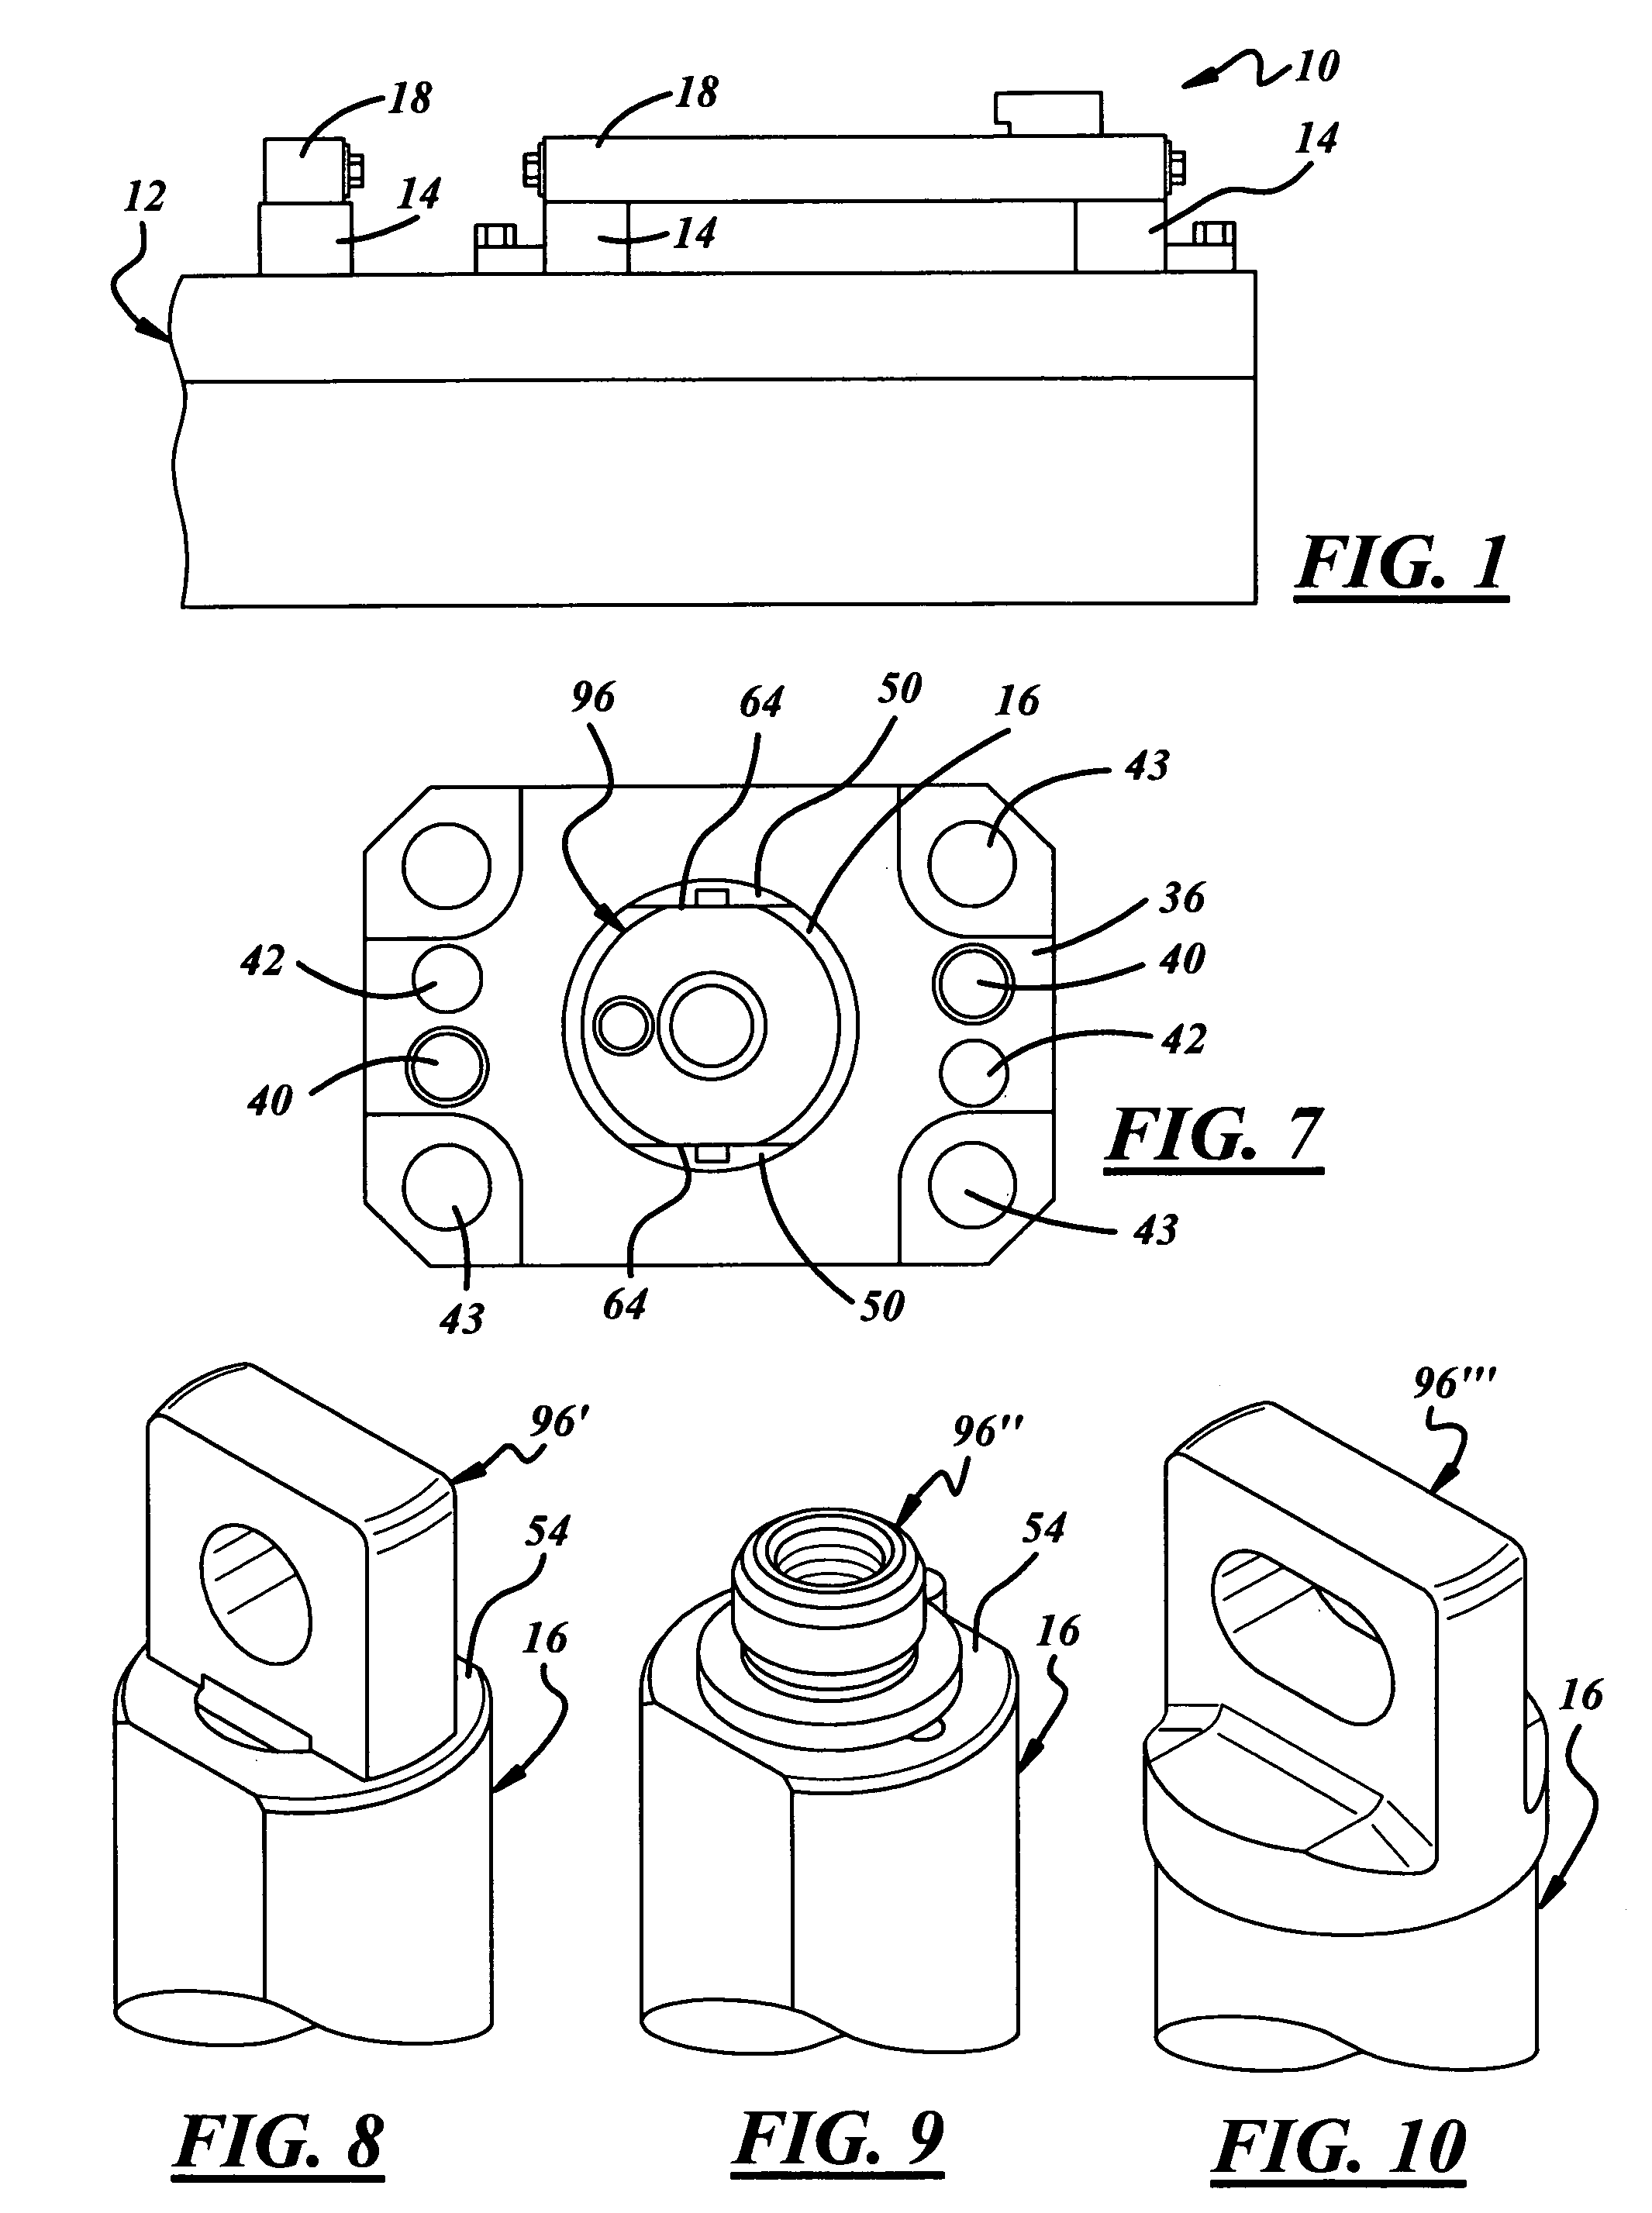 Reaction device for forming equipment